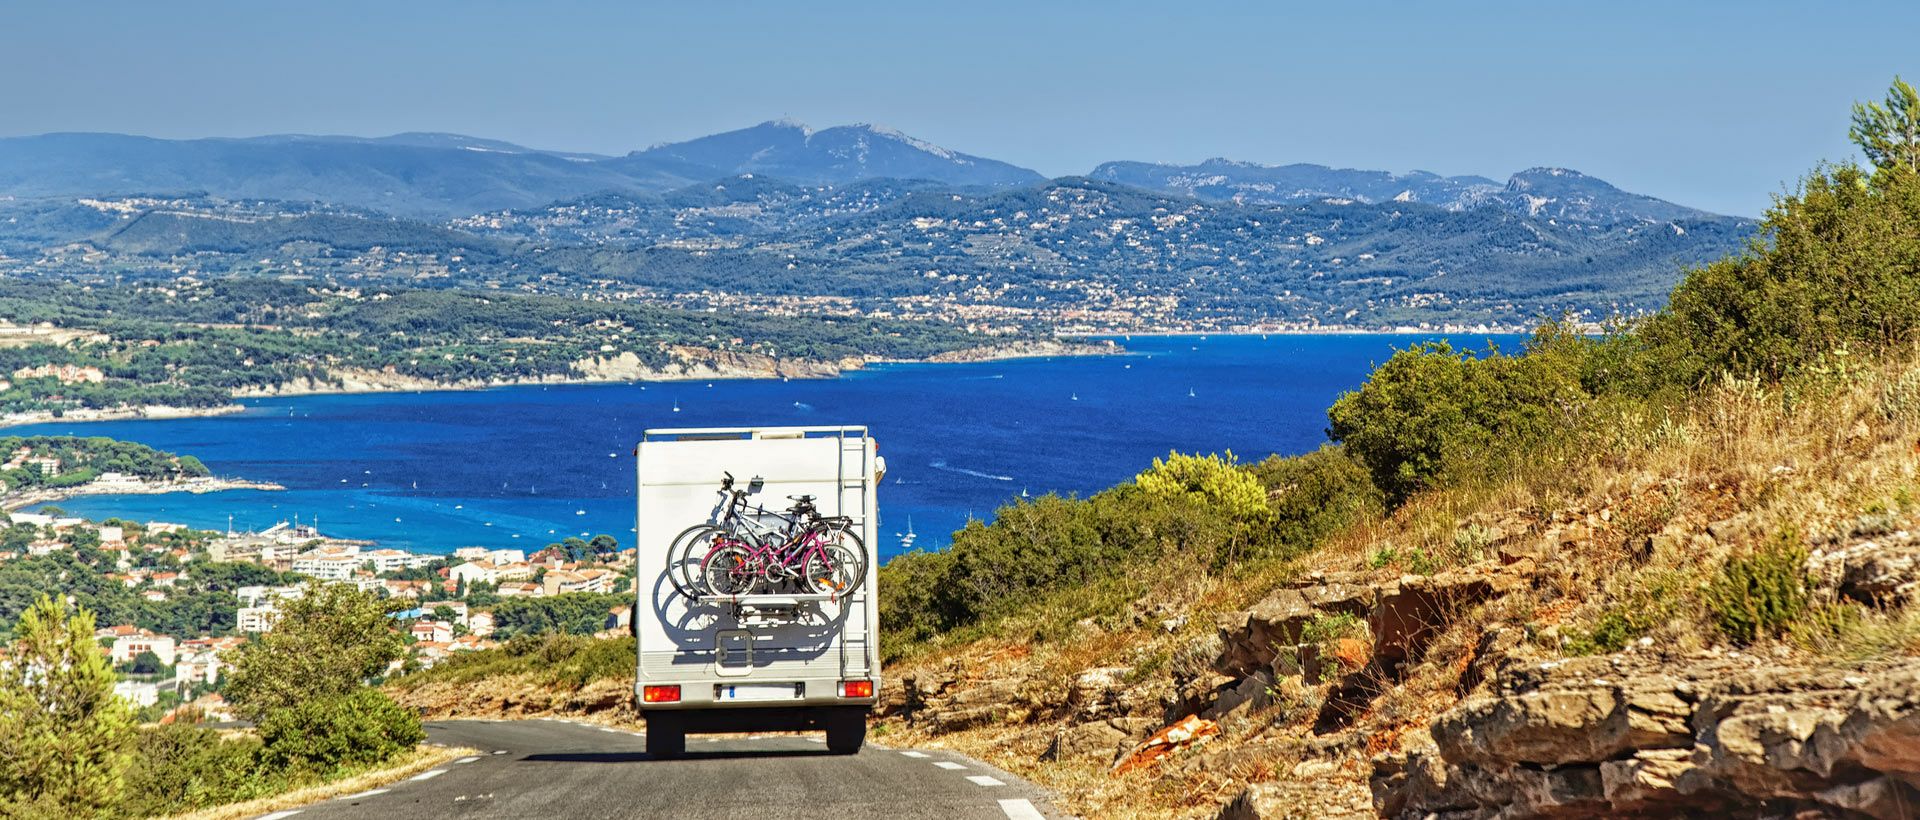 The Top 5 Reasons to Choose a Campervan Holiday